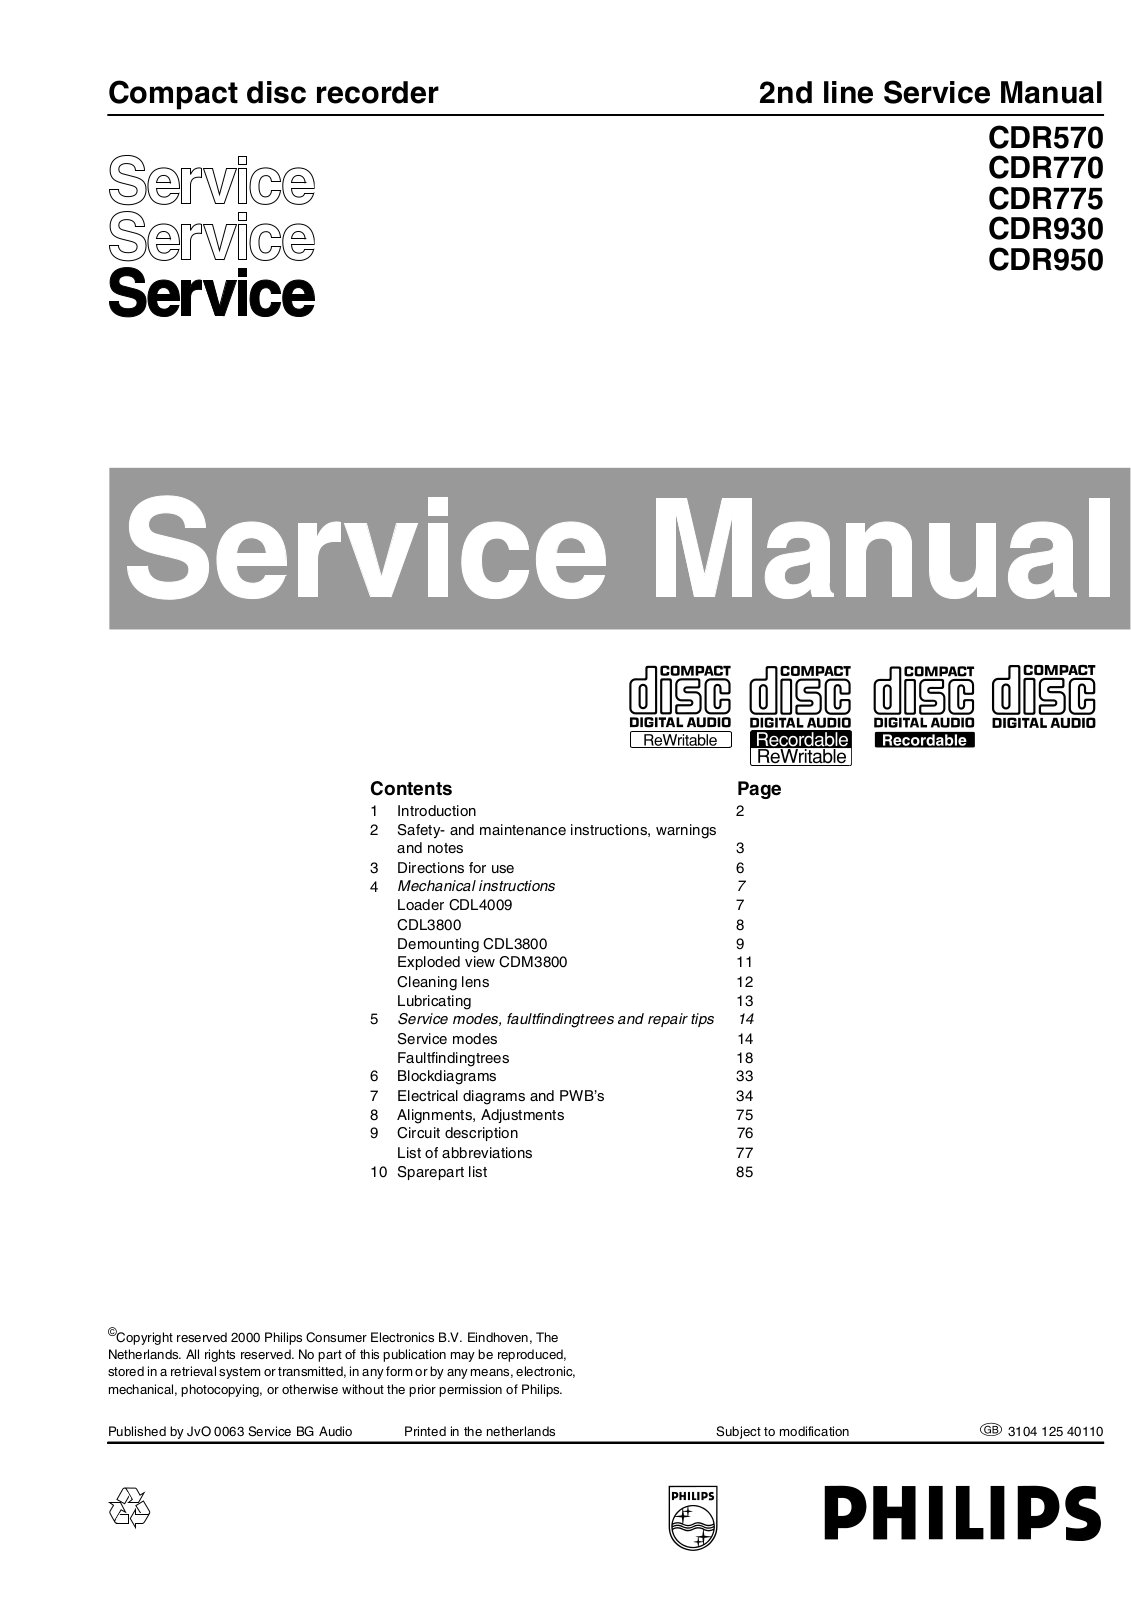 Philips CDR-570 Service manual